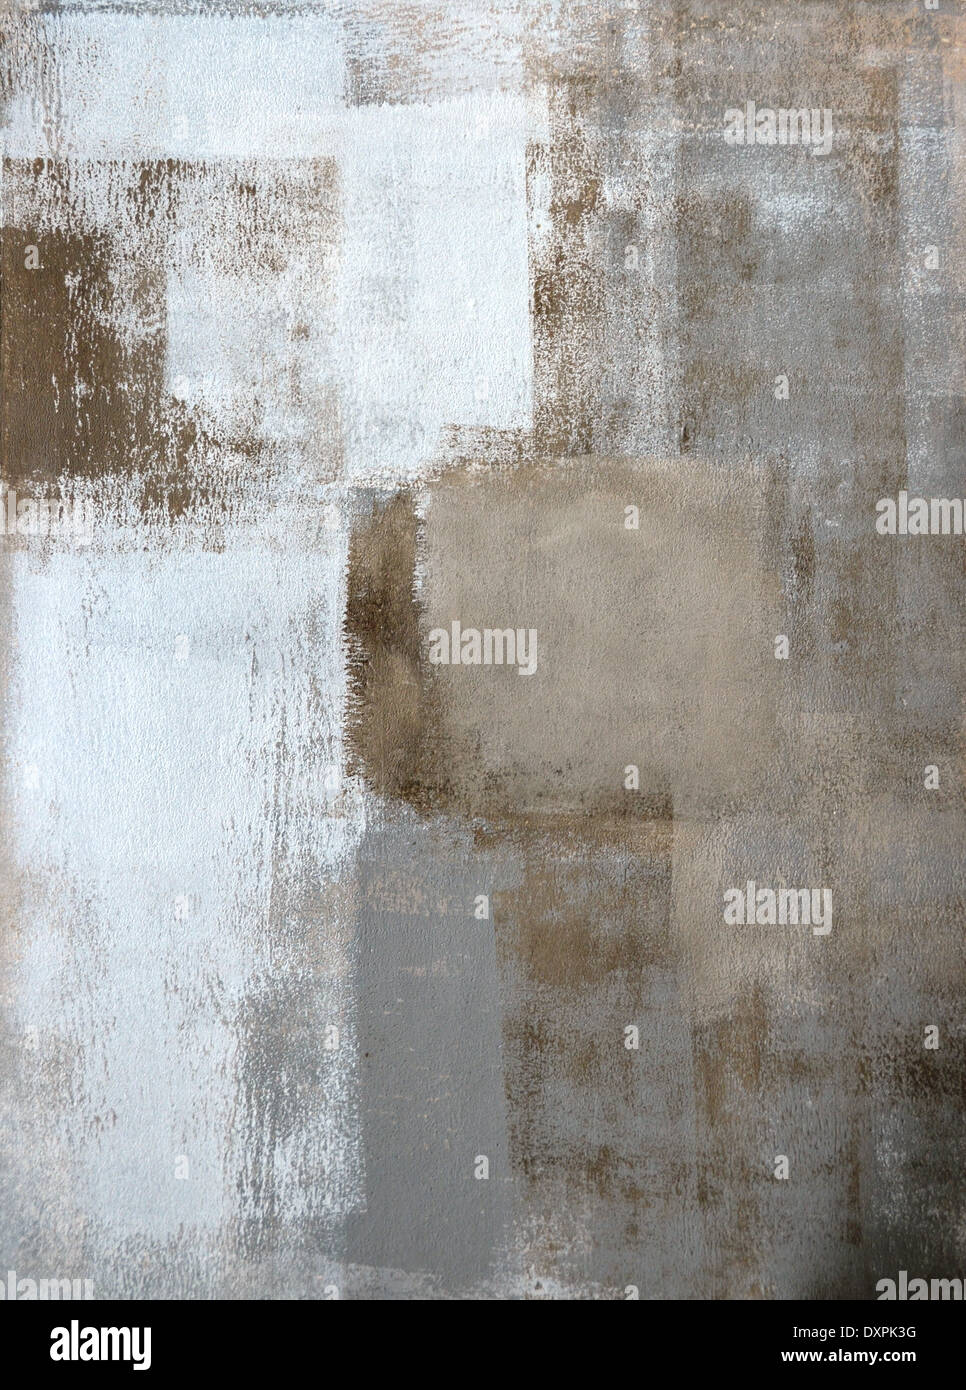 Grey and Beige Abstract Art Painting Stock Photo